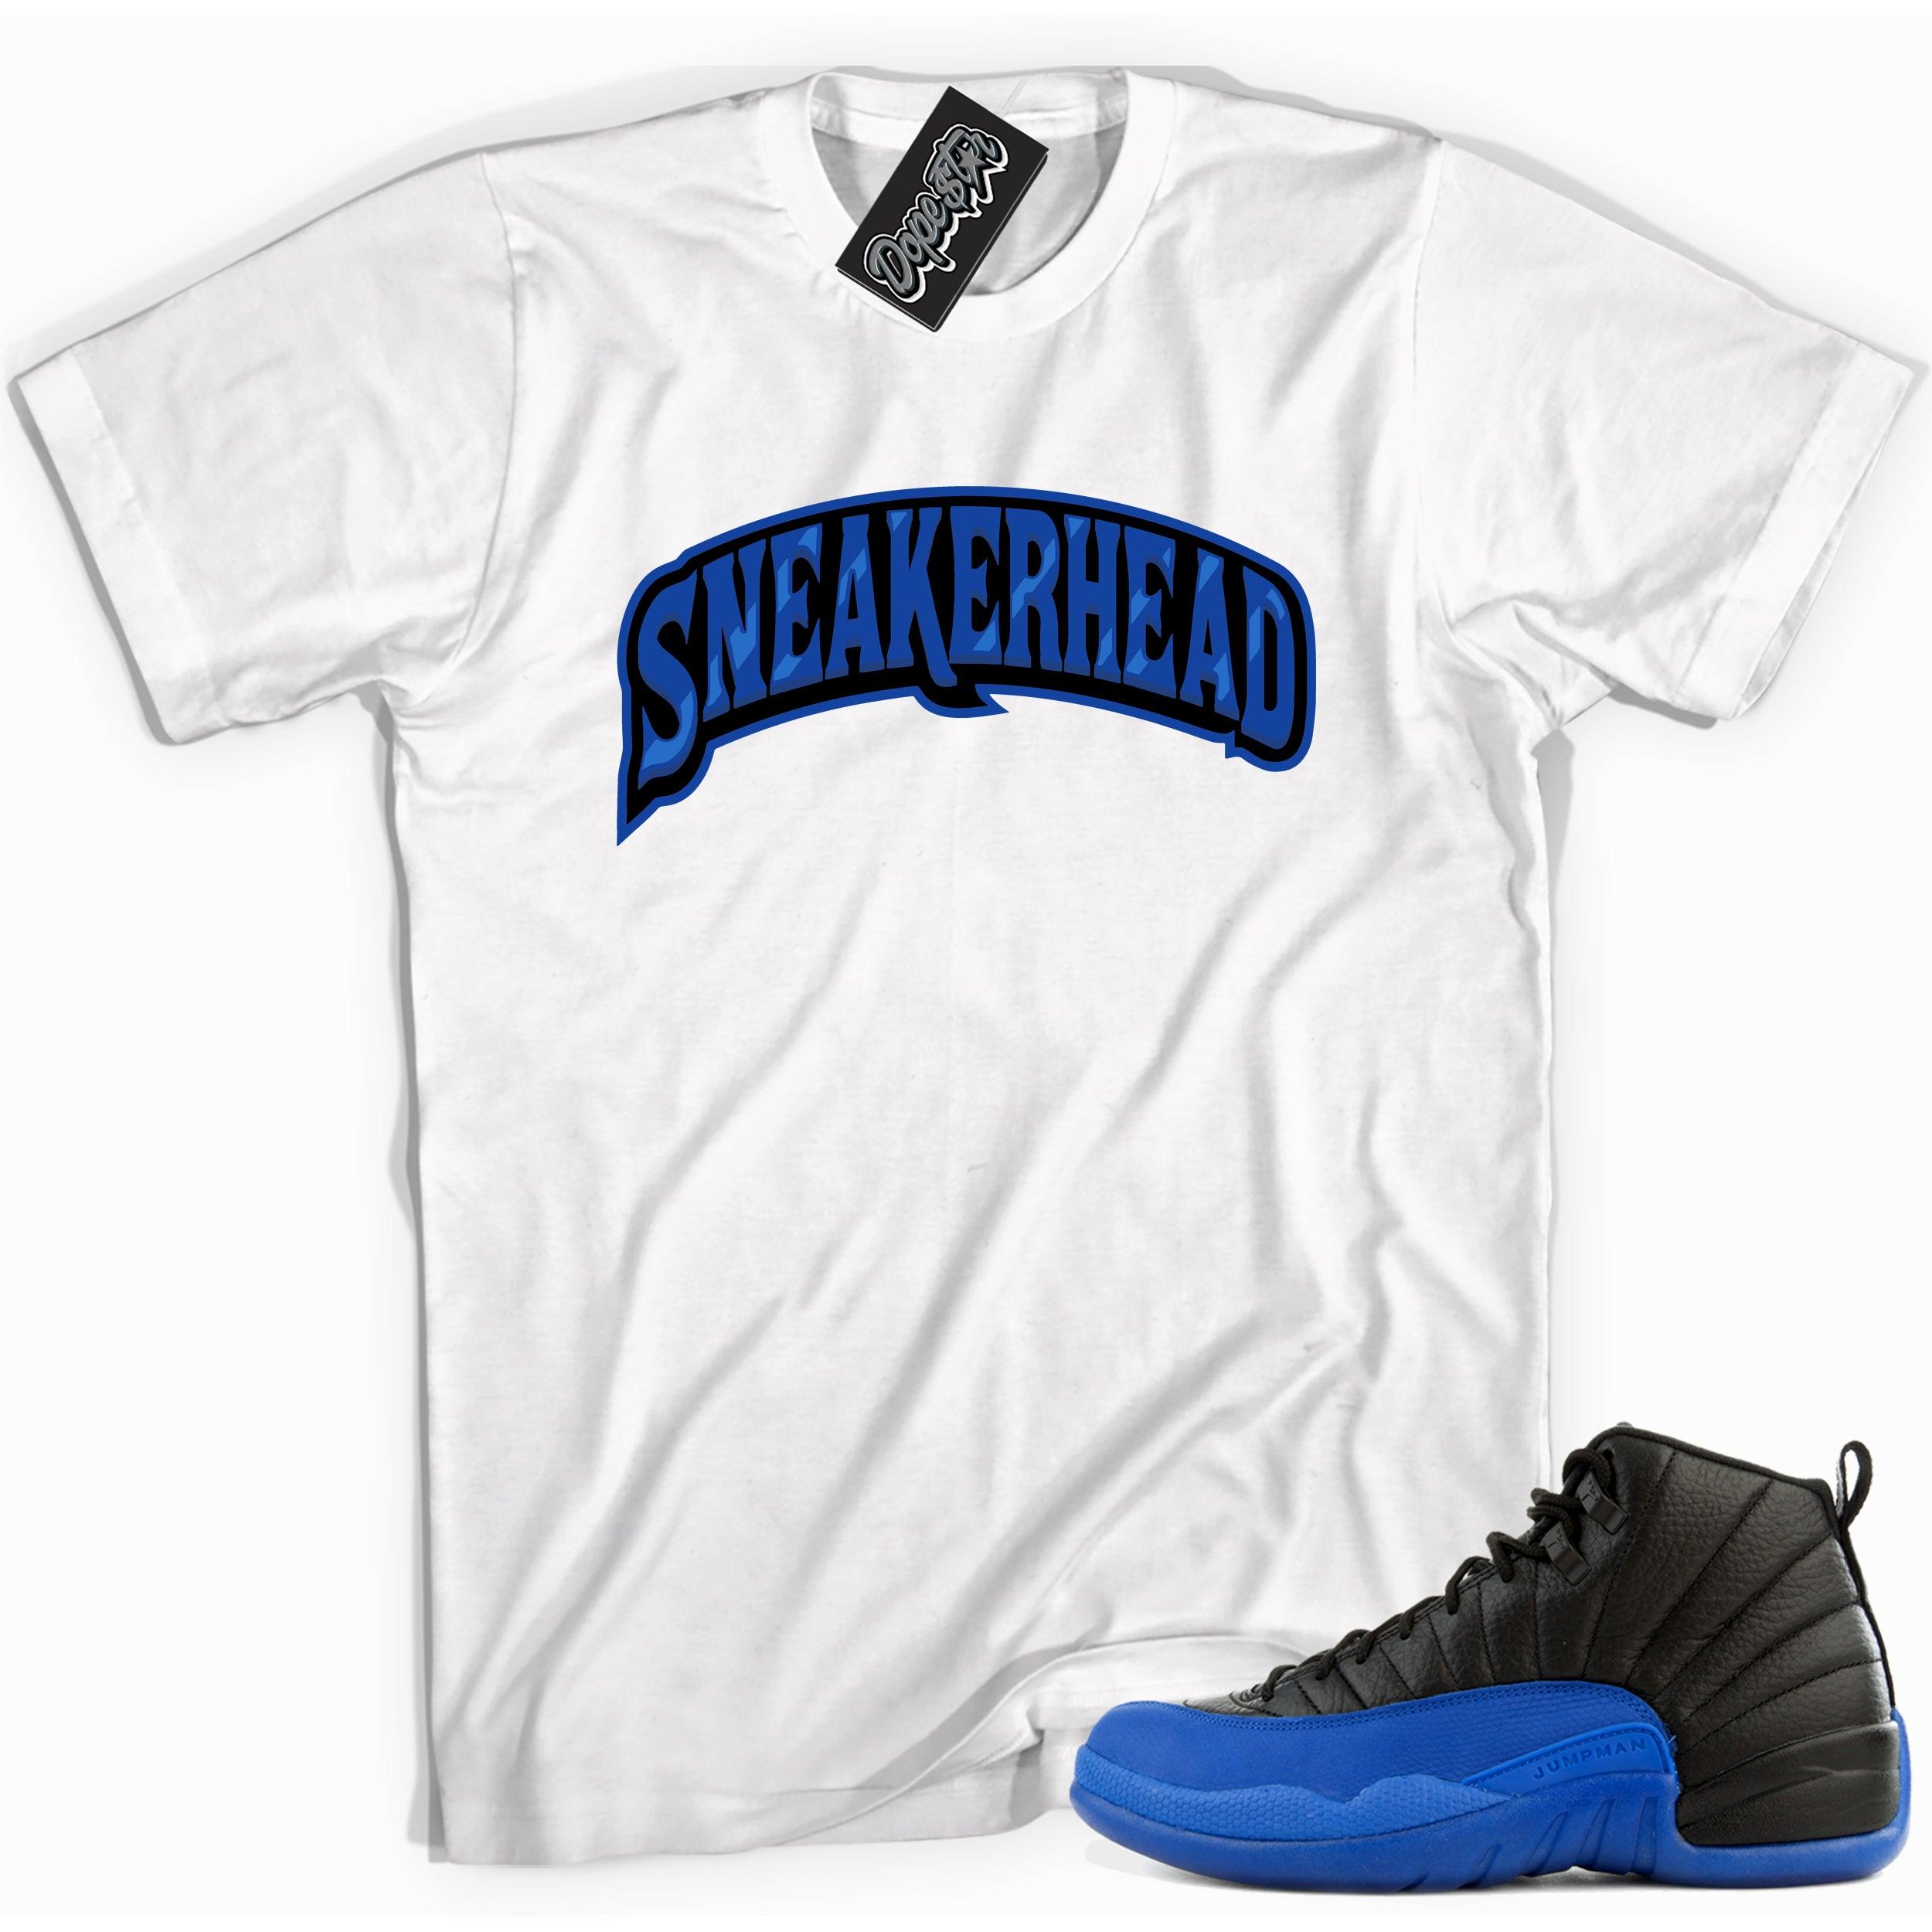 Cool white graphic tee with 'sneakerhead' print, that perfectly matches Air Jordan 12 Retro Black Game Royal sneakers.